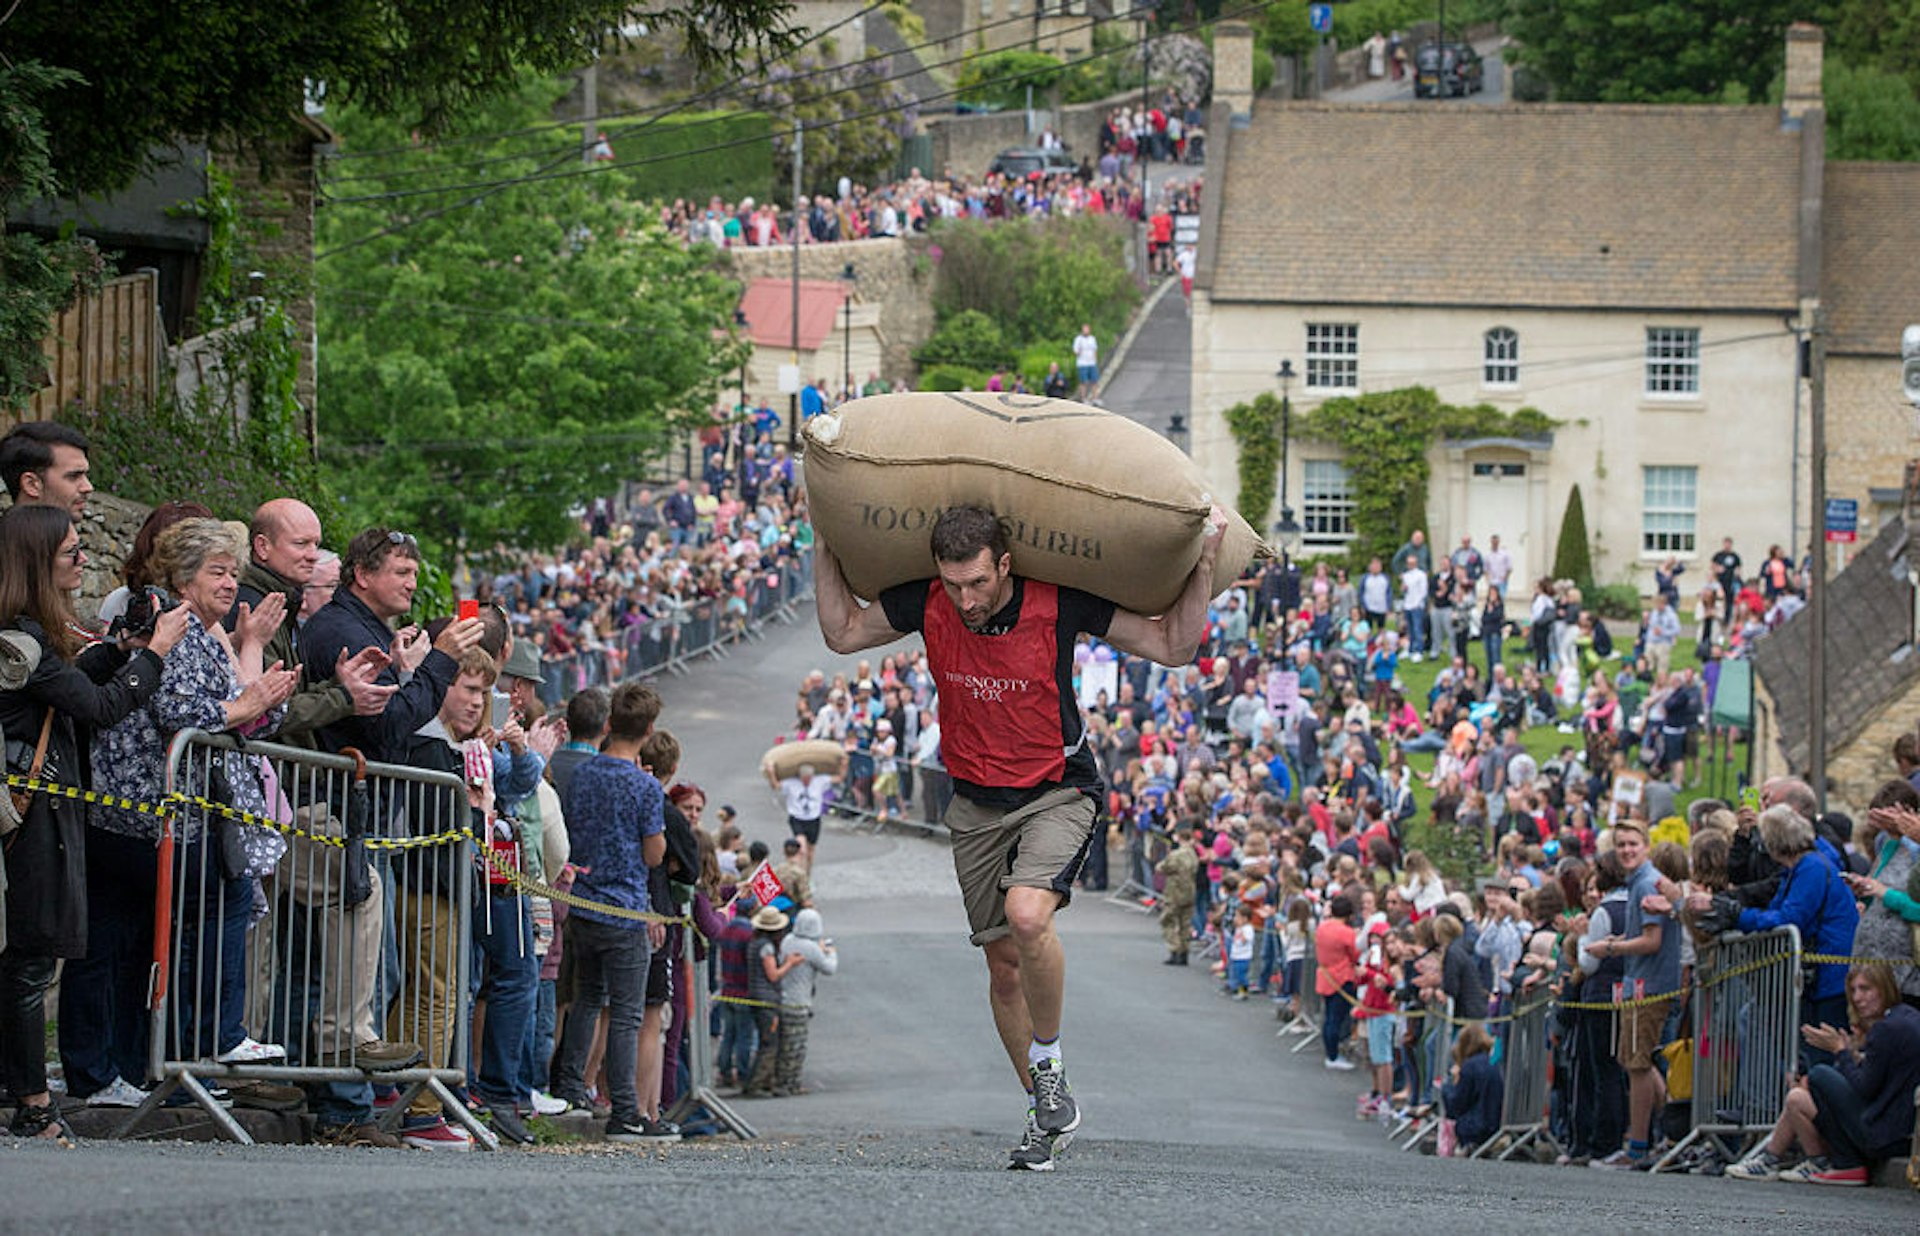 A man races with a sack of wool on his back as spectactors watch in the village of Tetbury, Gloucestershire, the Cotswolds, England, United Kingdom